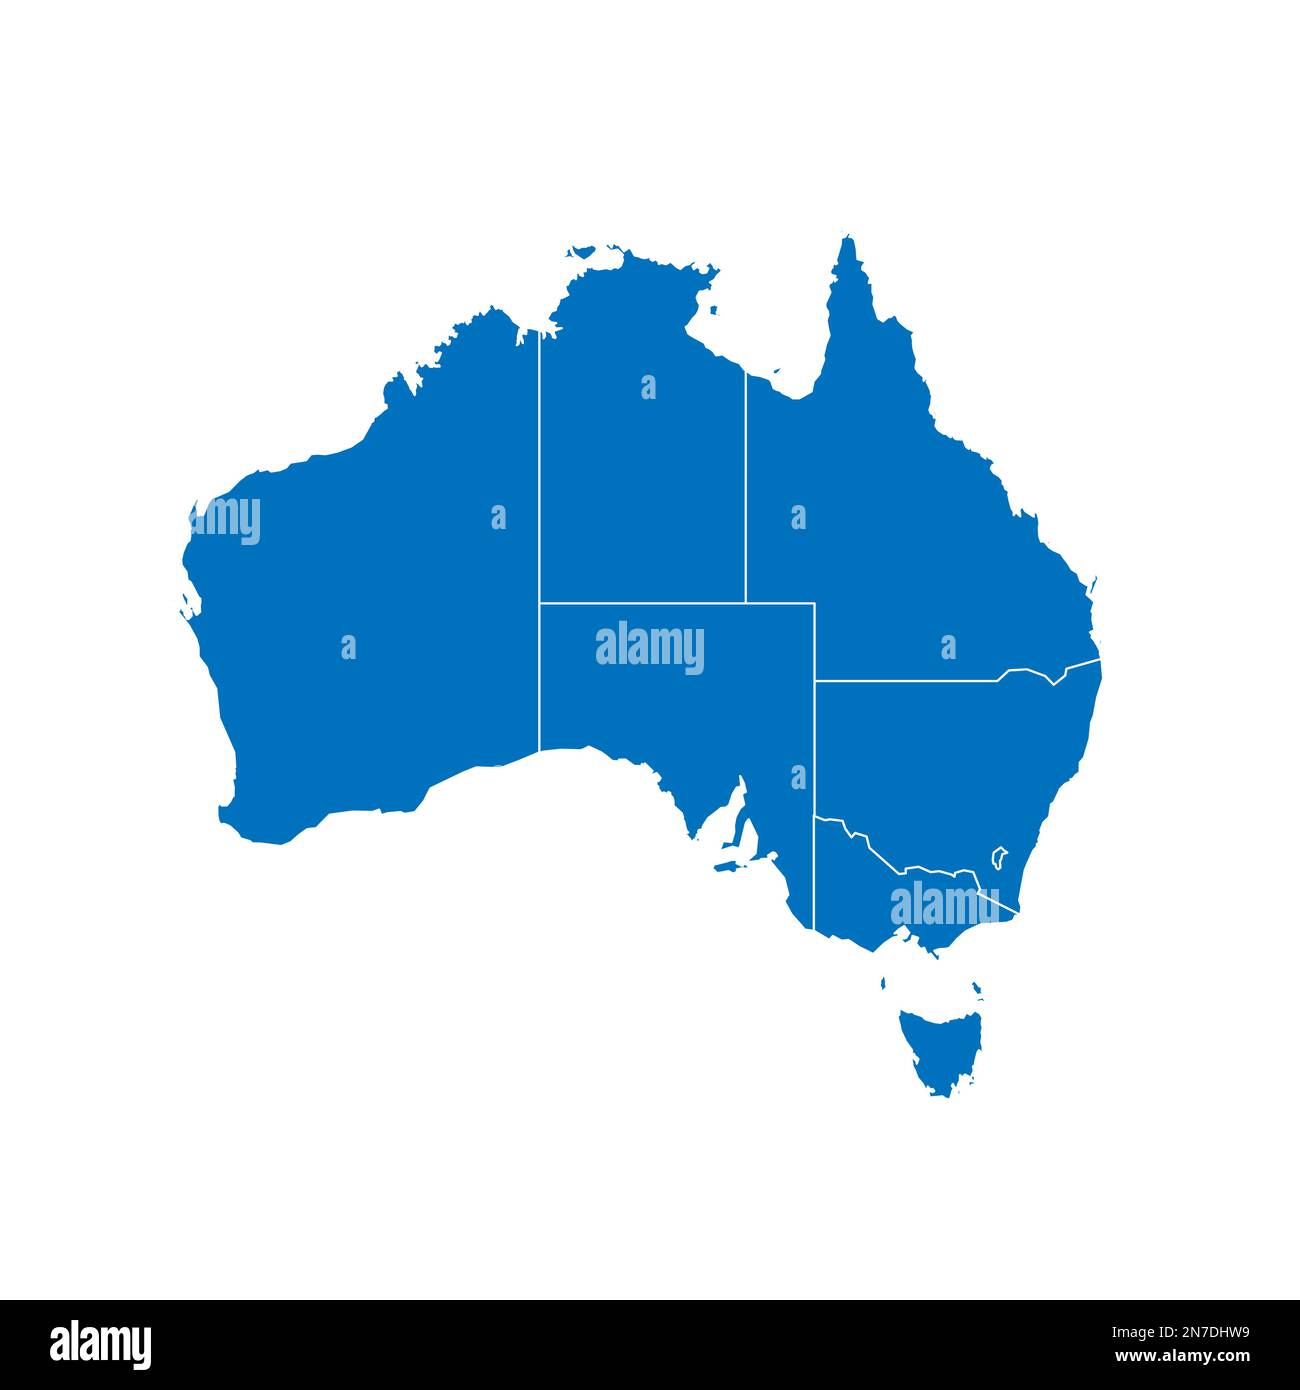 Australia Political Map Of Administrative Divisions States And